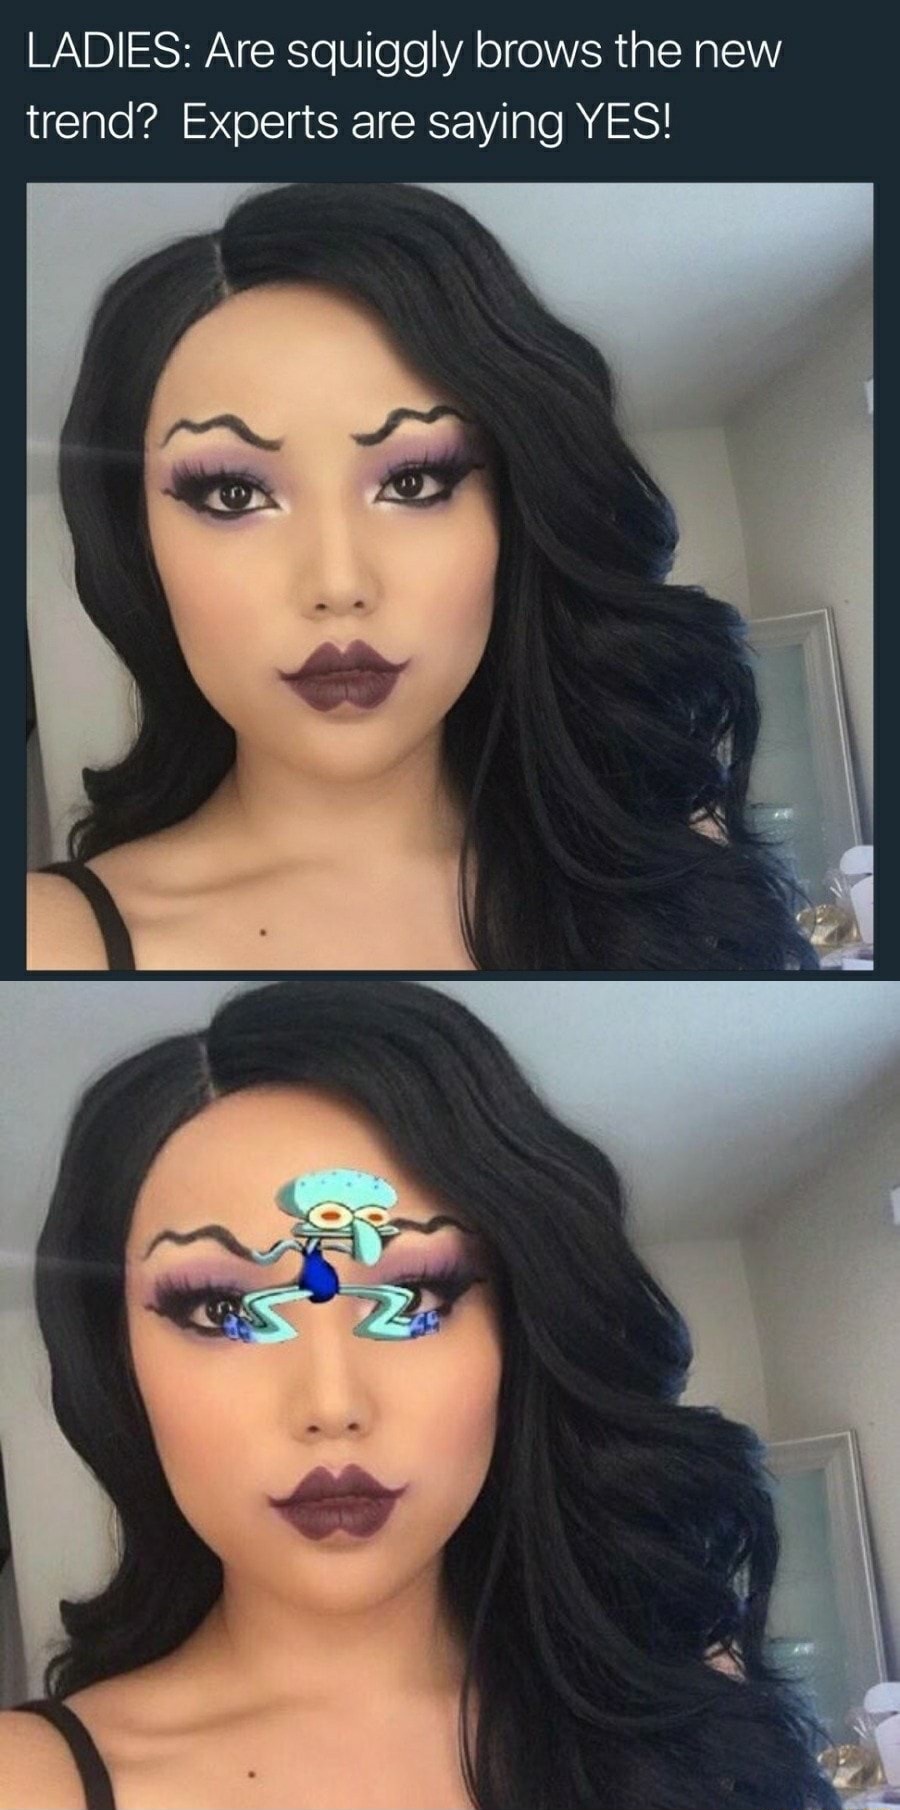 Meme making fun of squiggly eyebrows trend